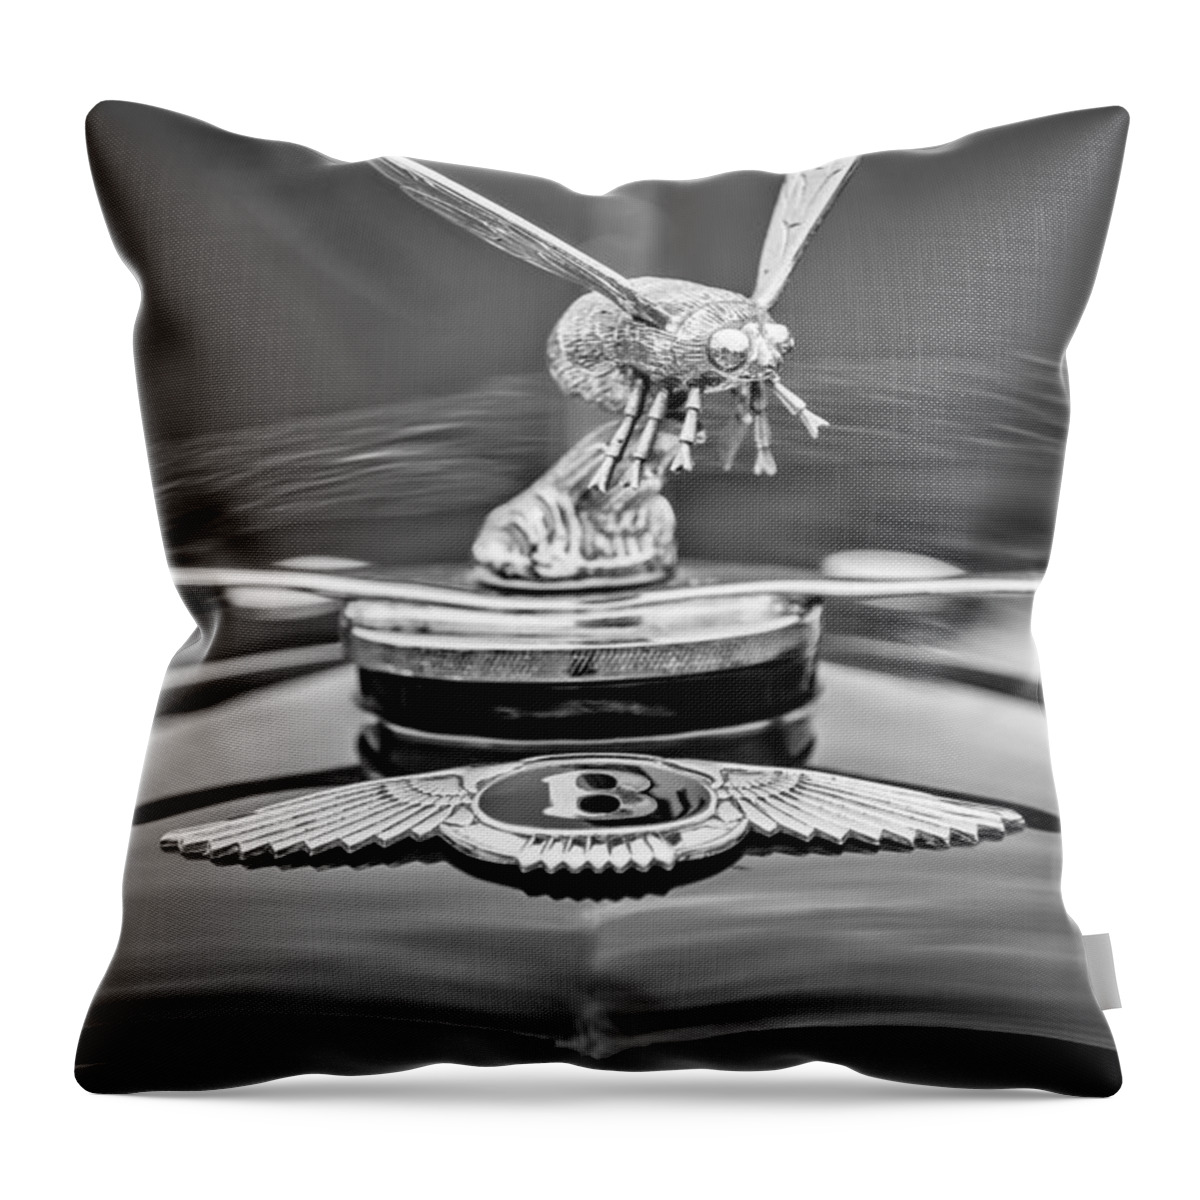 1934 Bentley 3.5-litre Drophead Coupe Hood Ornament Throw Pillow featuring the photograph 1934 Bentley 3.5-Litre Drophead Coupe Hood Ornament -1669bw by Jill Reger